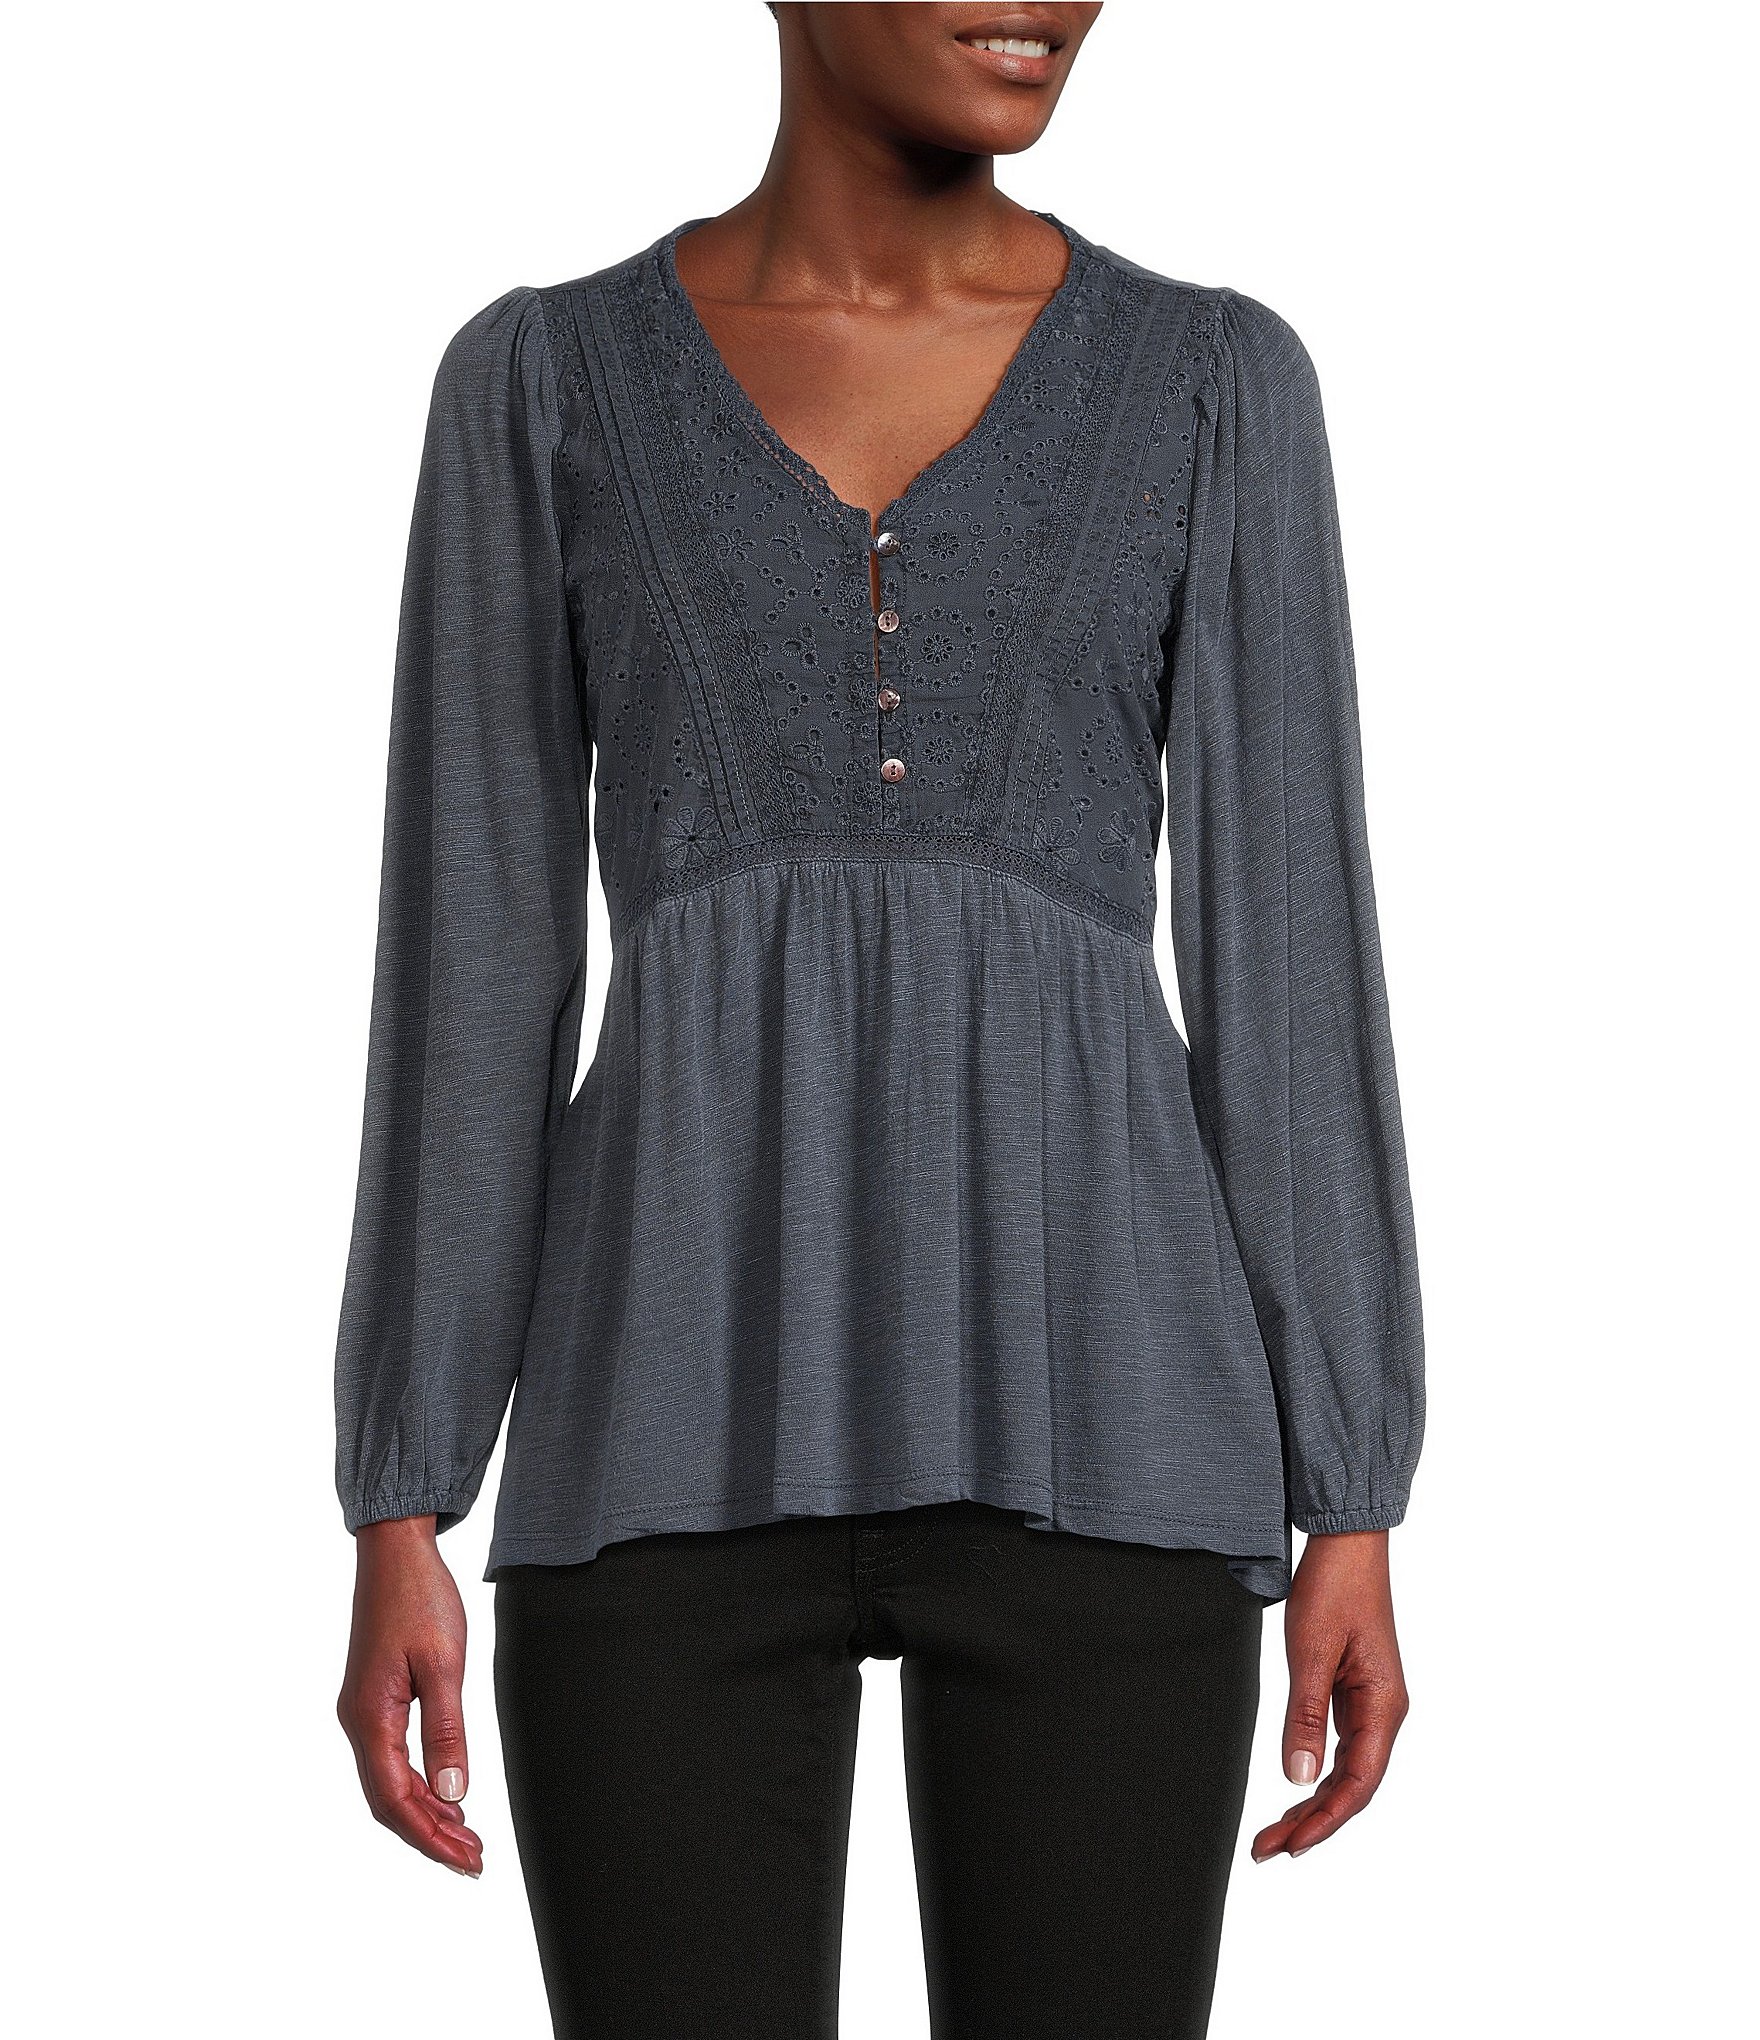 Lucky Brand Embroidered Square Neck Short Flutter Sleeve Top | Dillard's